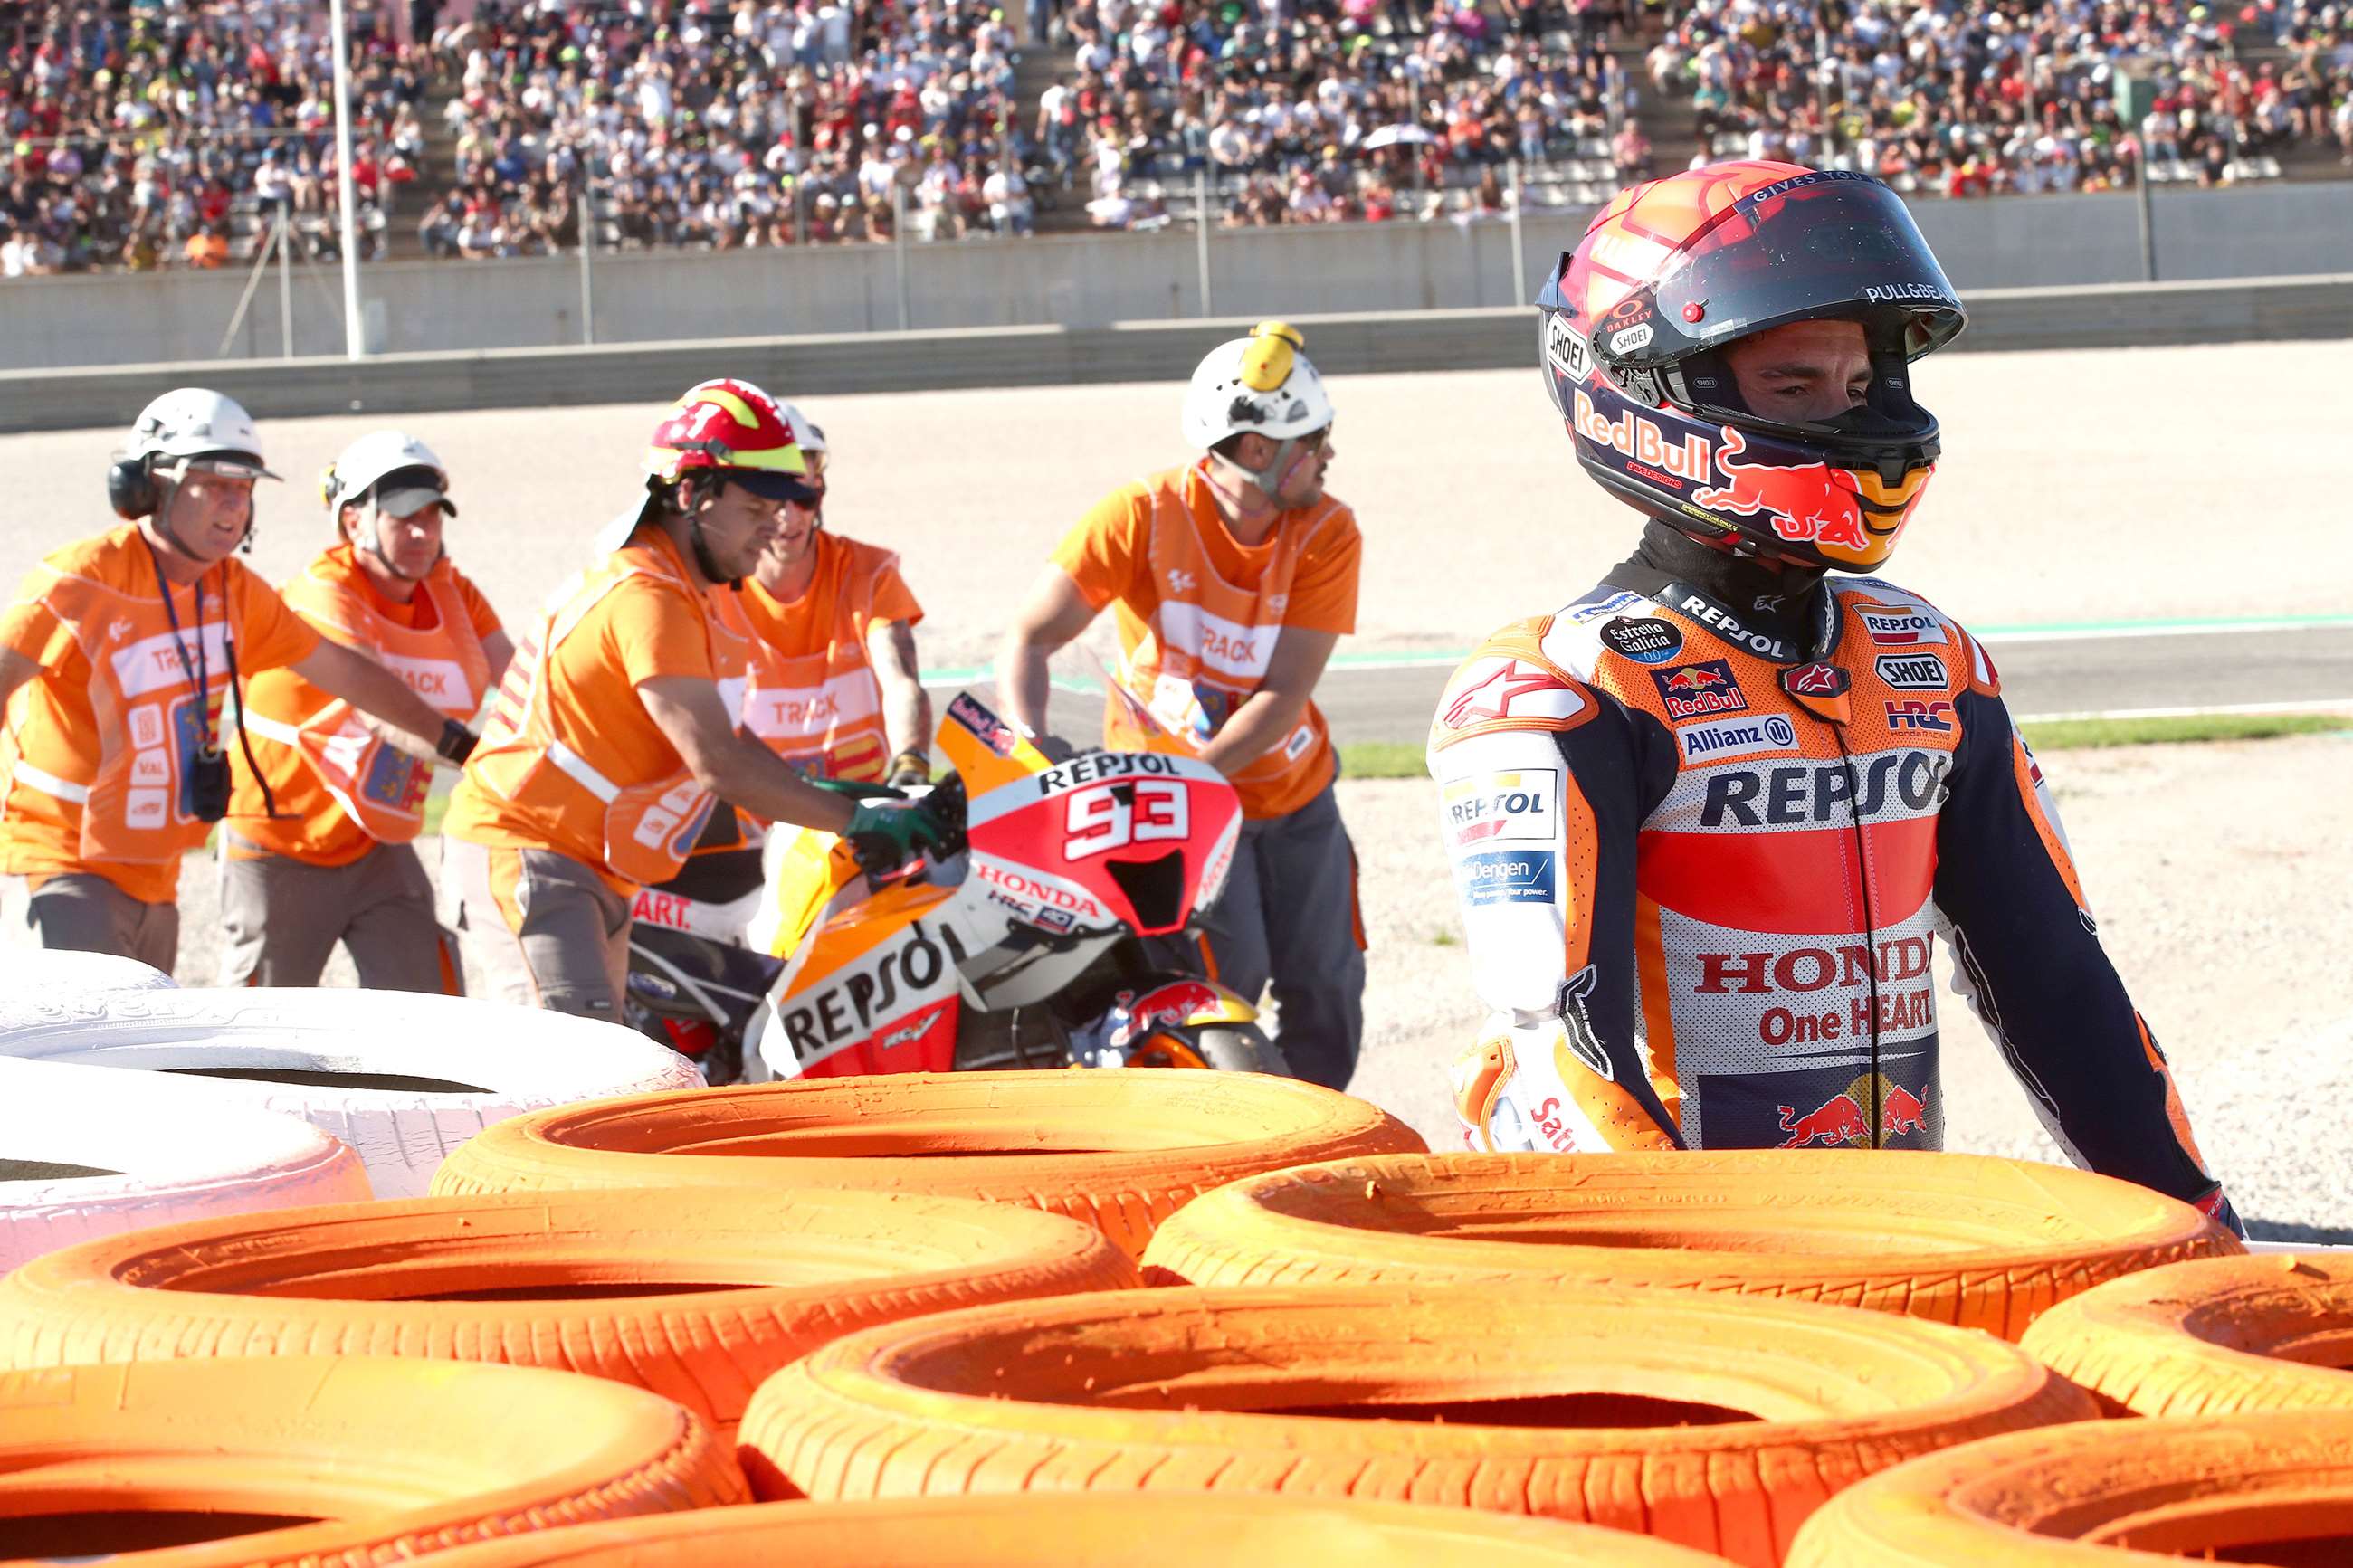 Marc Marquez continues to dabble with disaster in Moto GP GRR